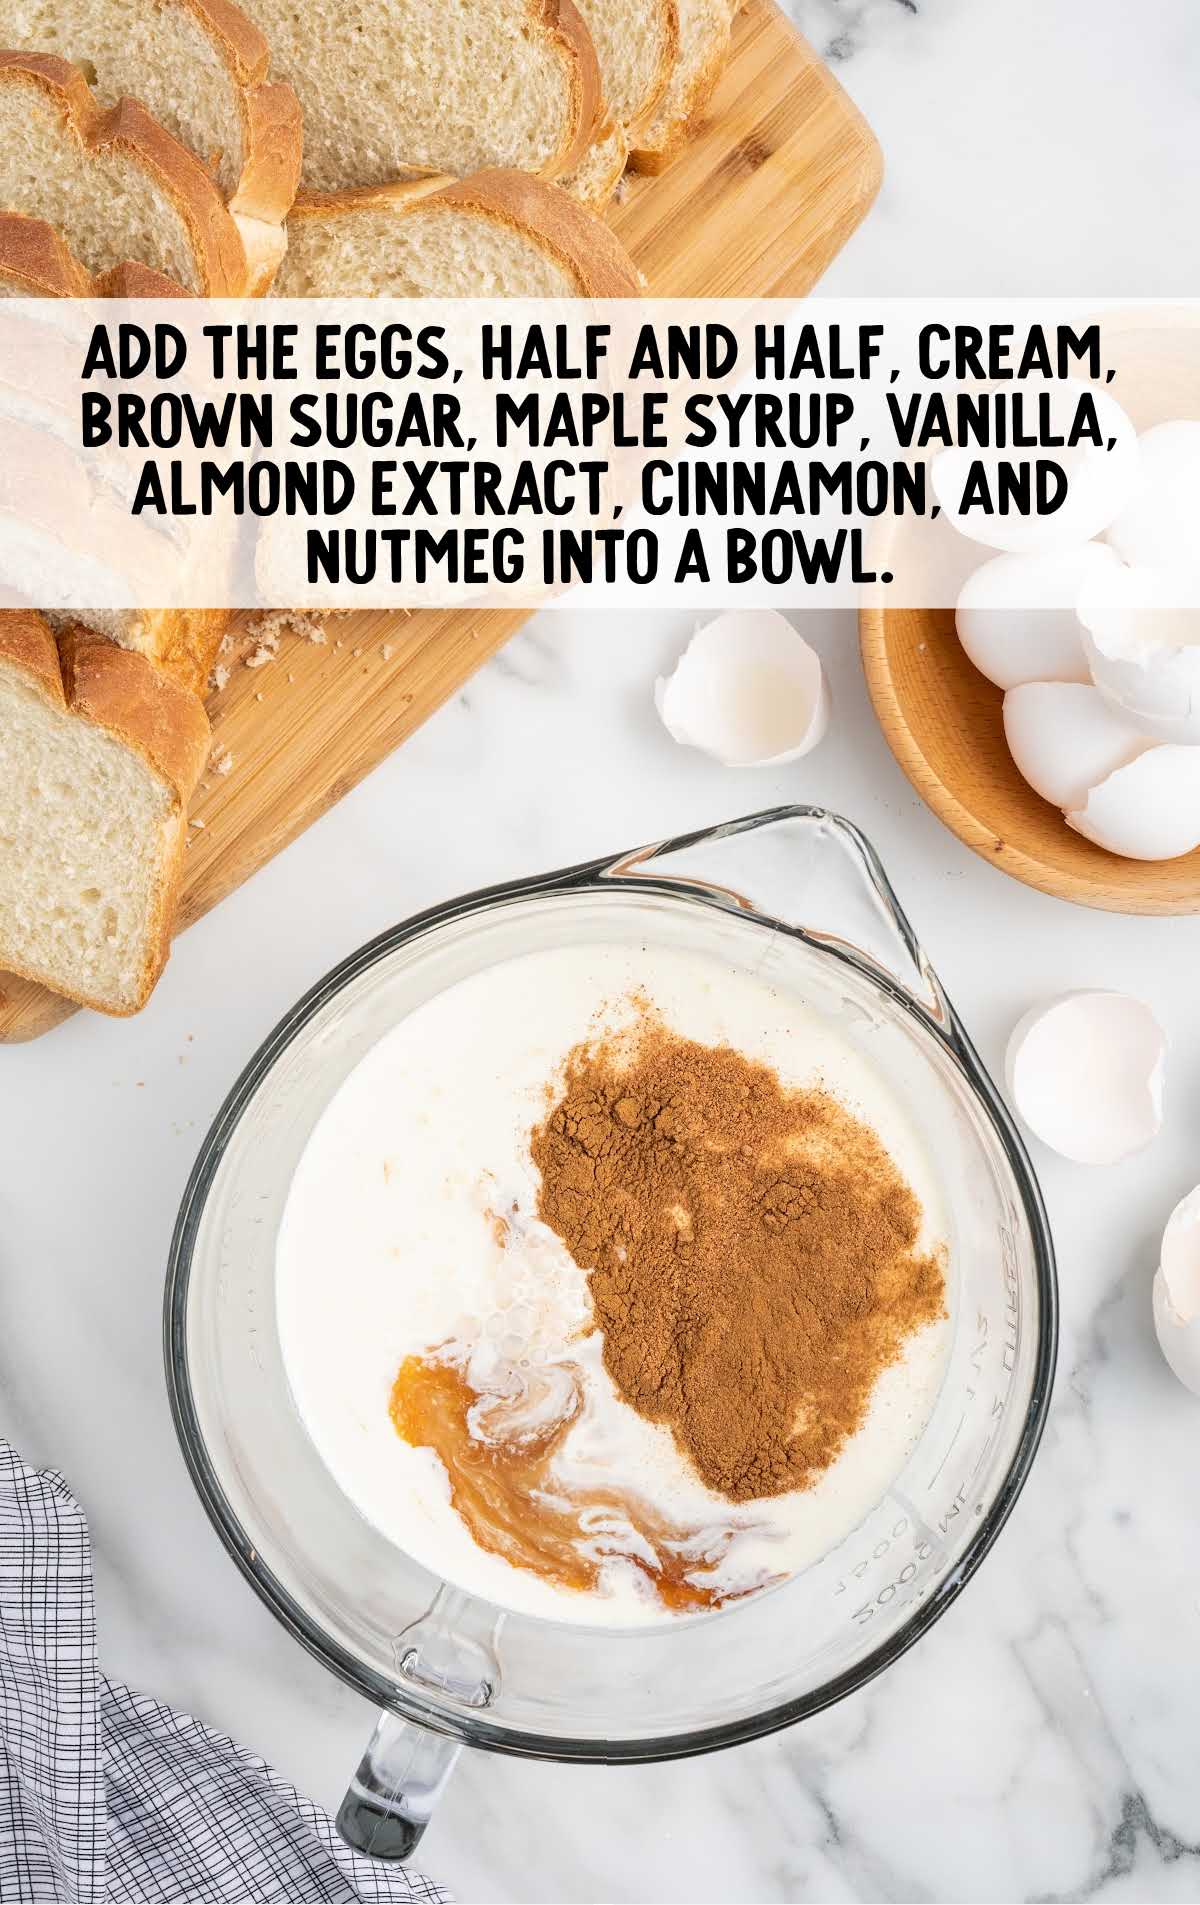 eggs, half and half, cream, brown sugar, maple, syrup, vanilla, almond extract, cinnamon, and nutmeg added to a bowl